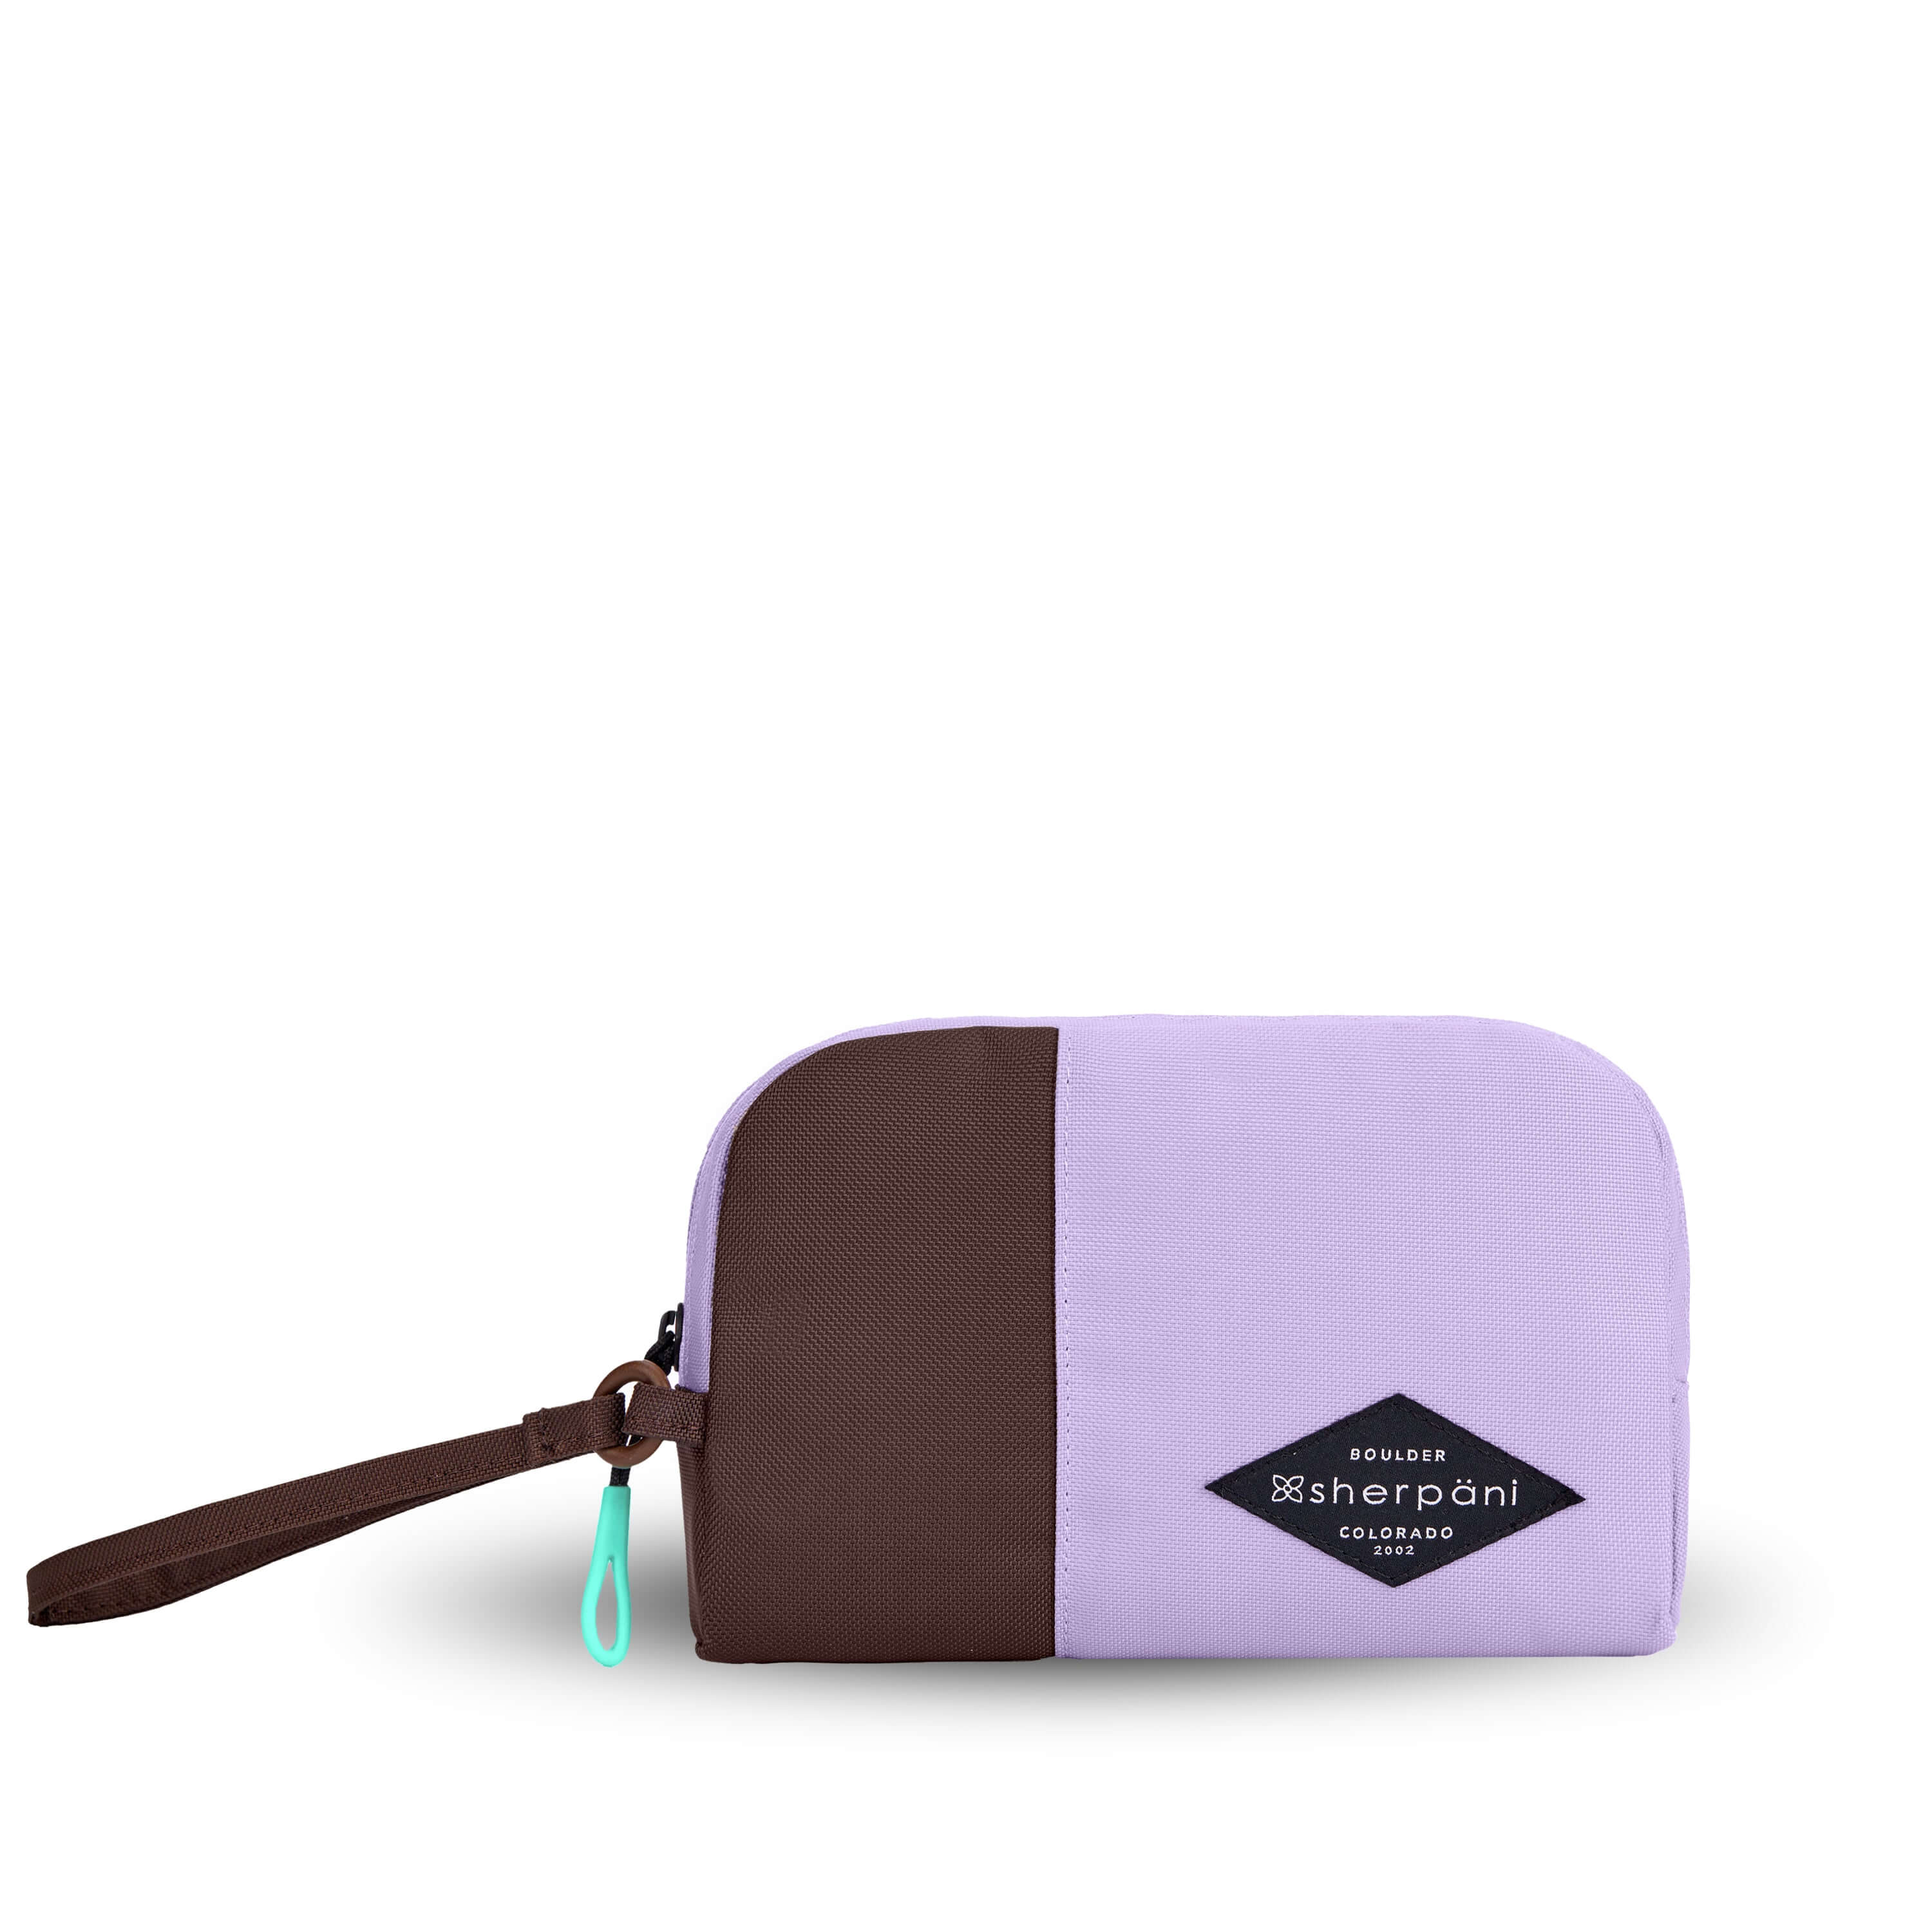 Flat front view of Sherpani travel accessory, the Jolie in Lavender, in medium size. The pouch is two-toned in lavender and brown. It features a brown wristlet strap and an easy-pull zipper accented in aqua.